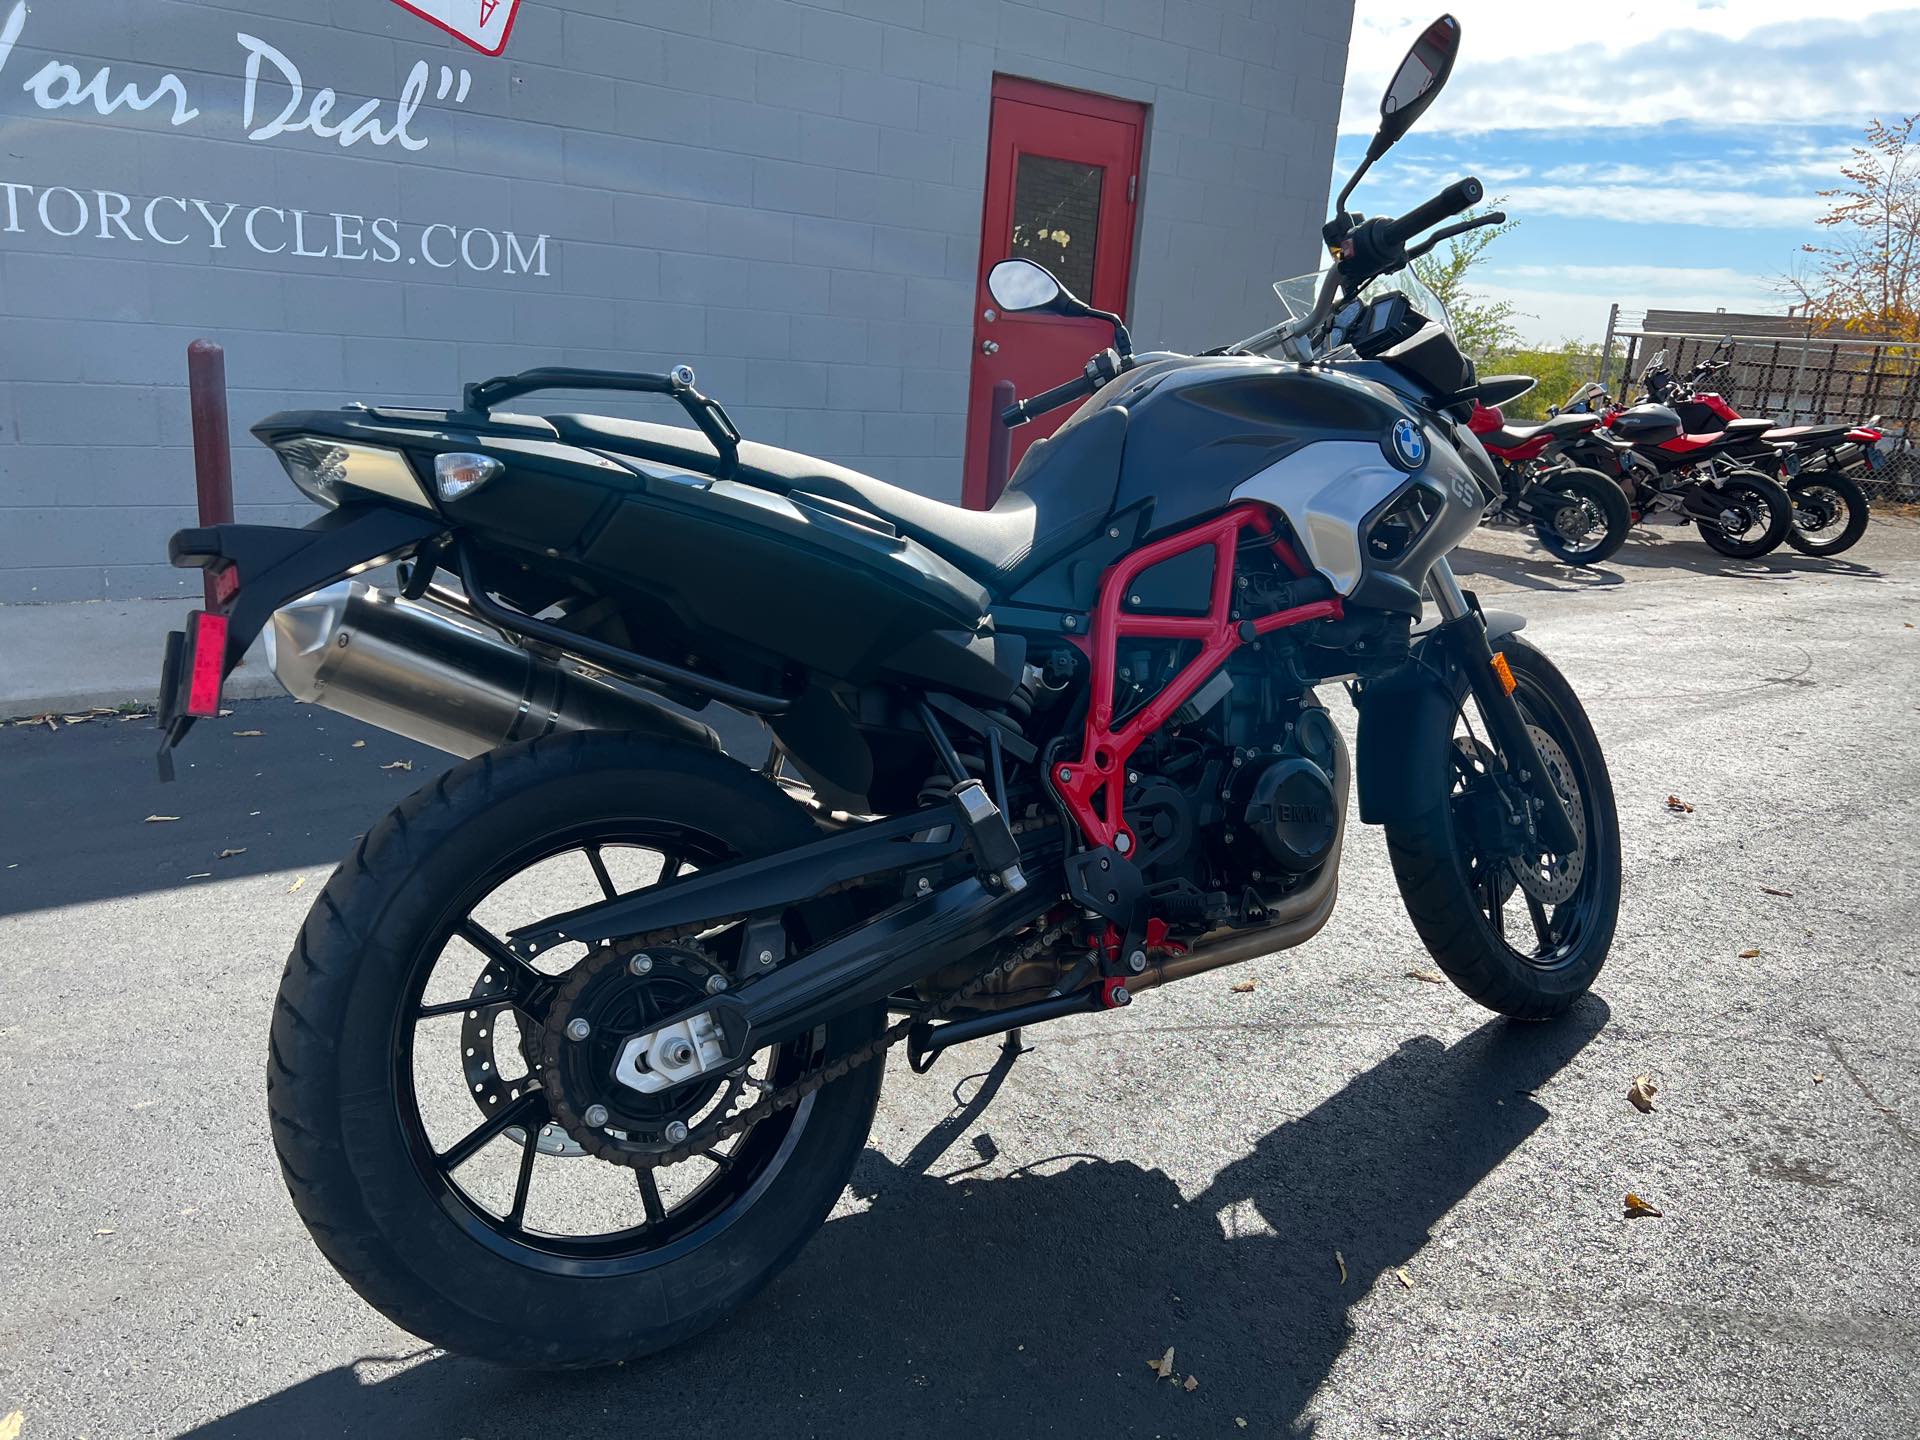 2017 BMW F 700 GS at Aces Motorcycles - Fort Collins